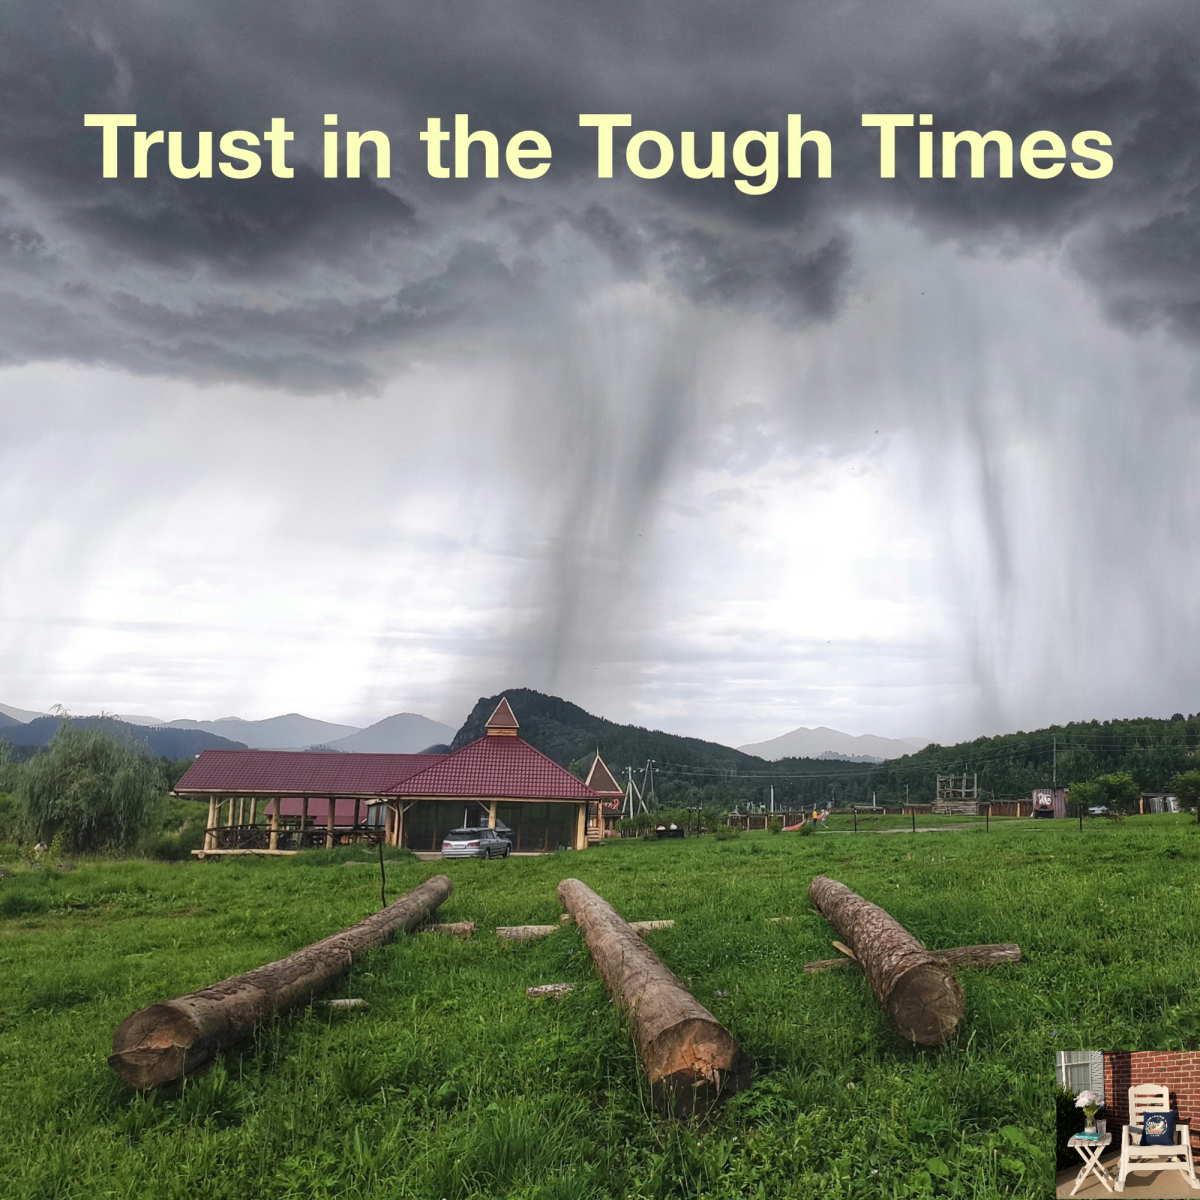 Trust in the Tough Times